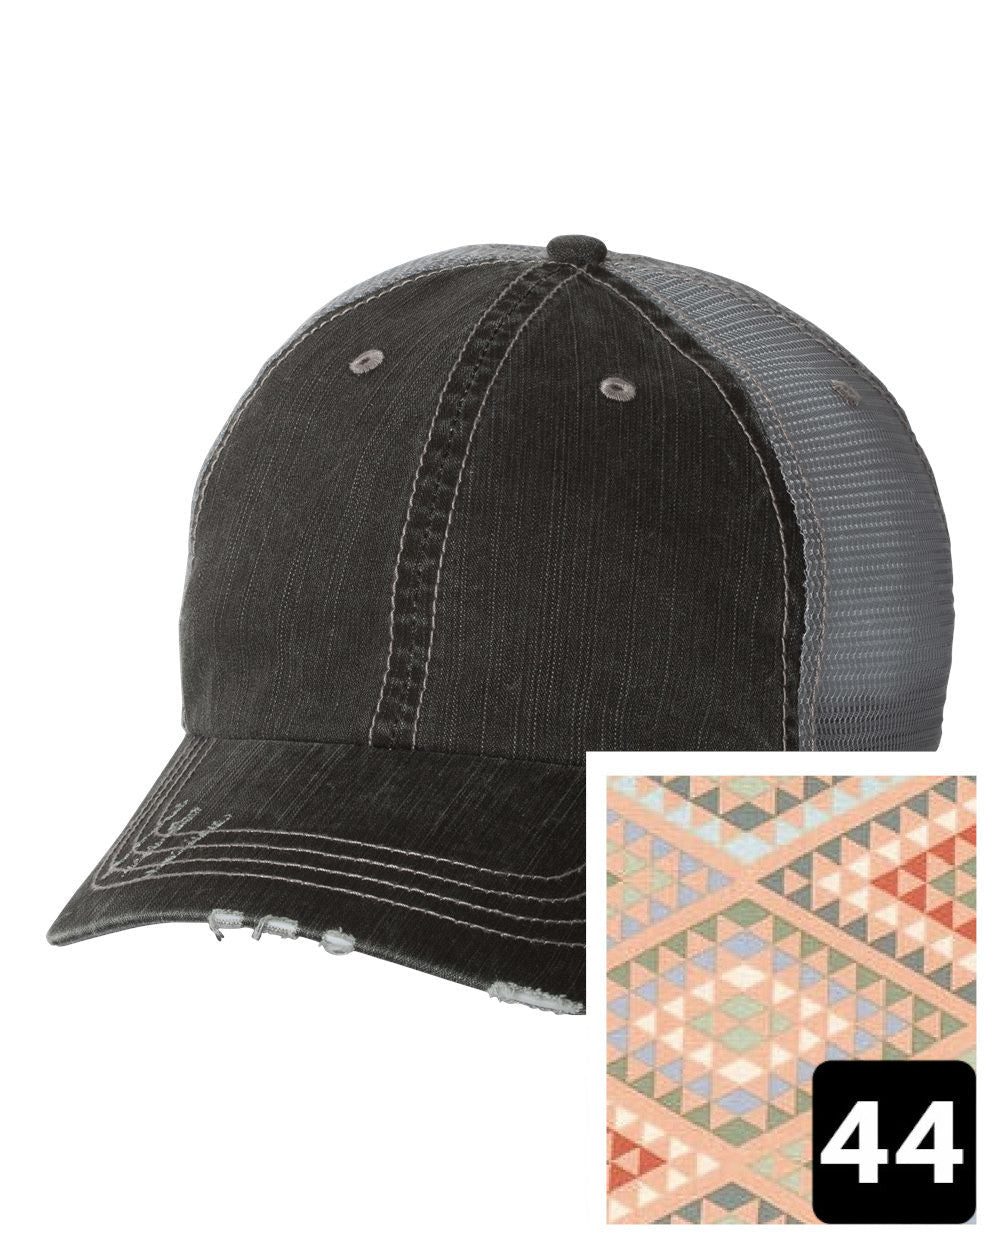 gray distressed trucker hat with navy coral and white chevron fabric state of Tennessee